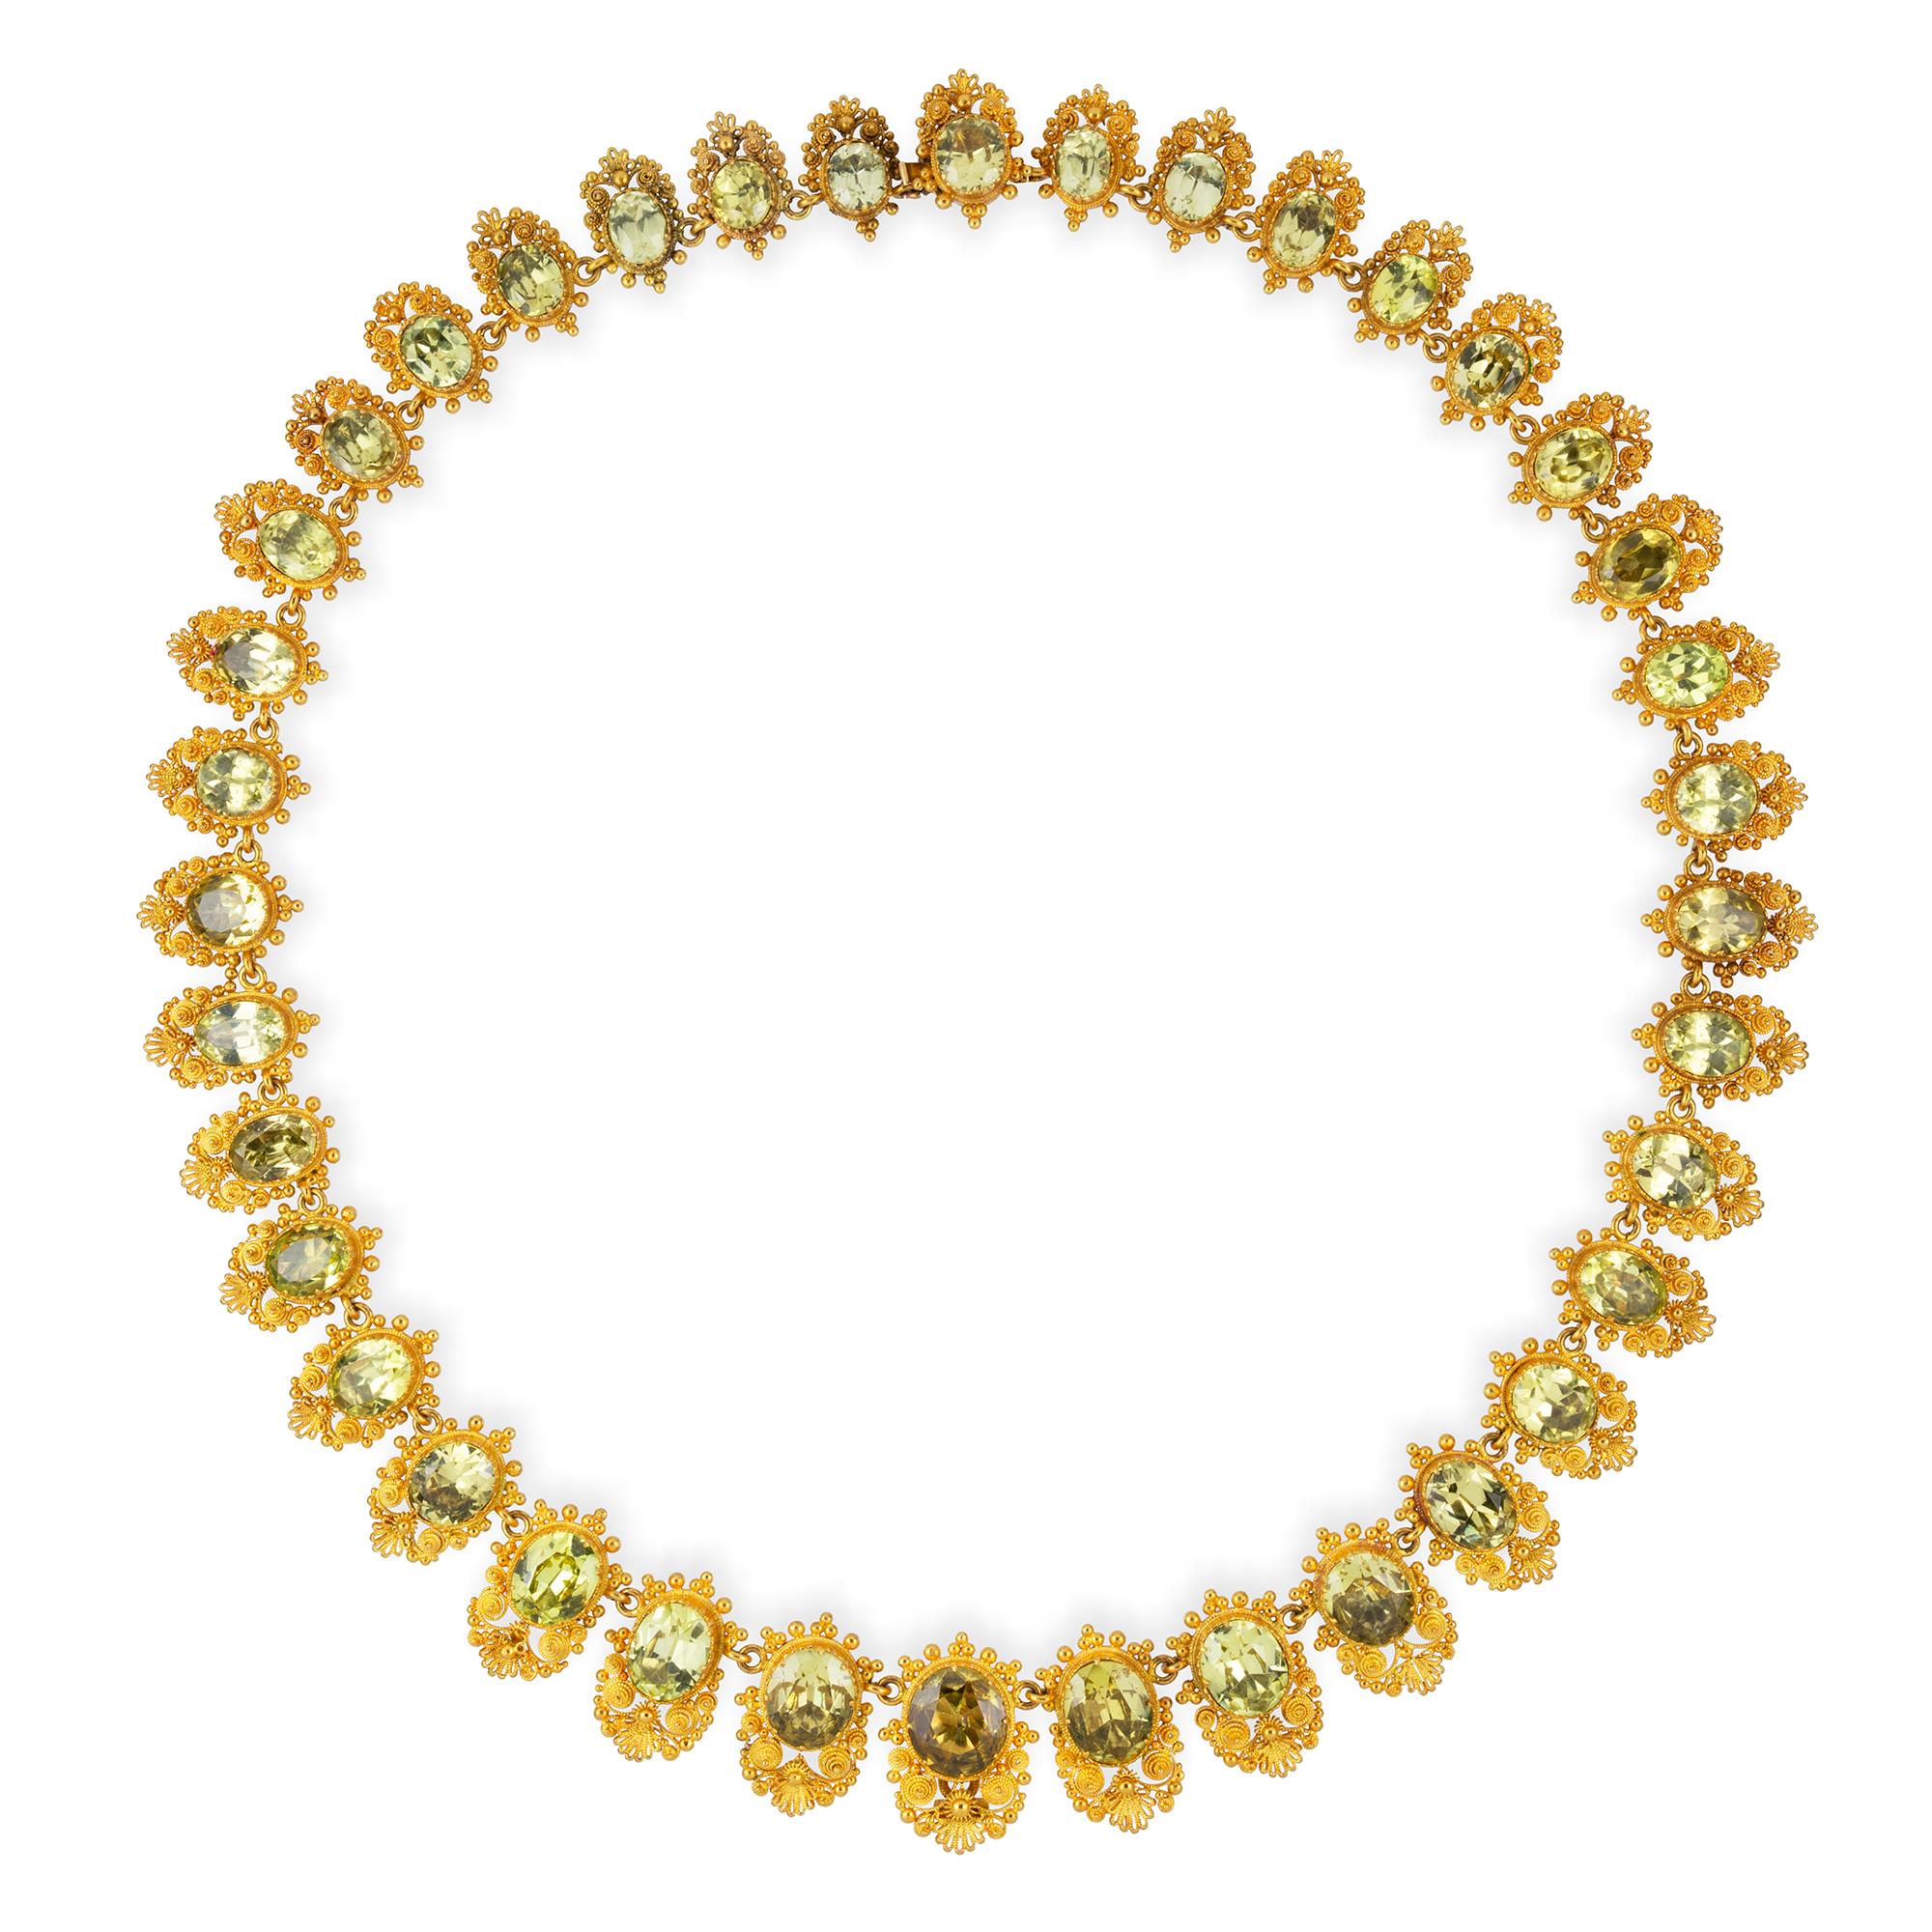 An early Victorian chrysoberyl necklace, the thirty-eight graduating chrysoberyls ranging approximate from 5.1 x 6.3mm to 8.7 x 10 mm each set within a close-back cut-down setting with very fine filigree decorations, all in yellow gold, to a hidden